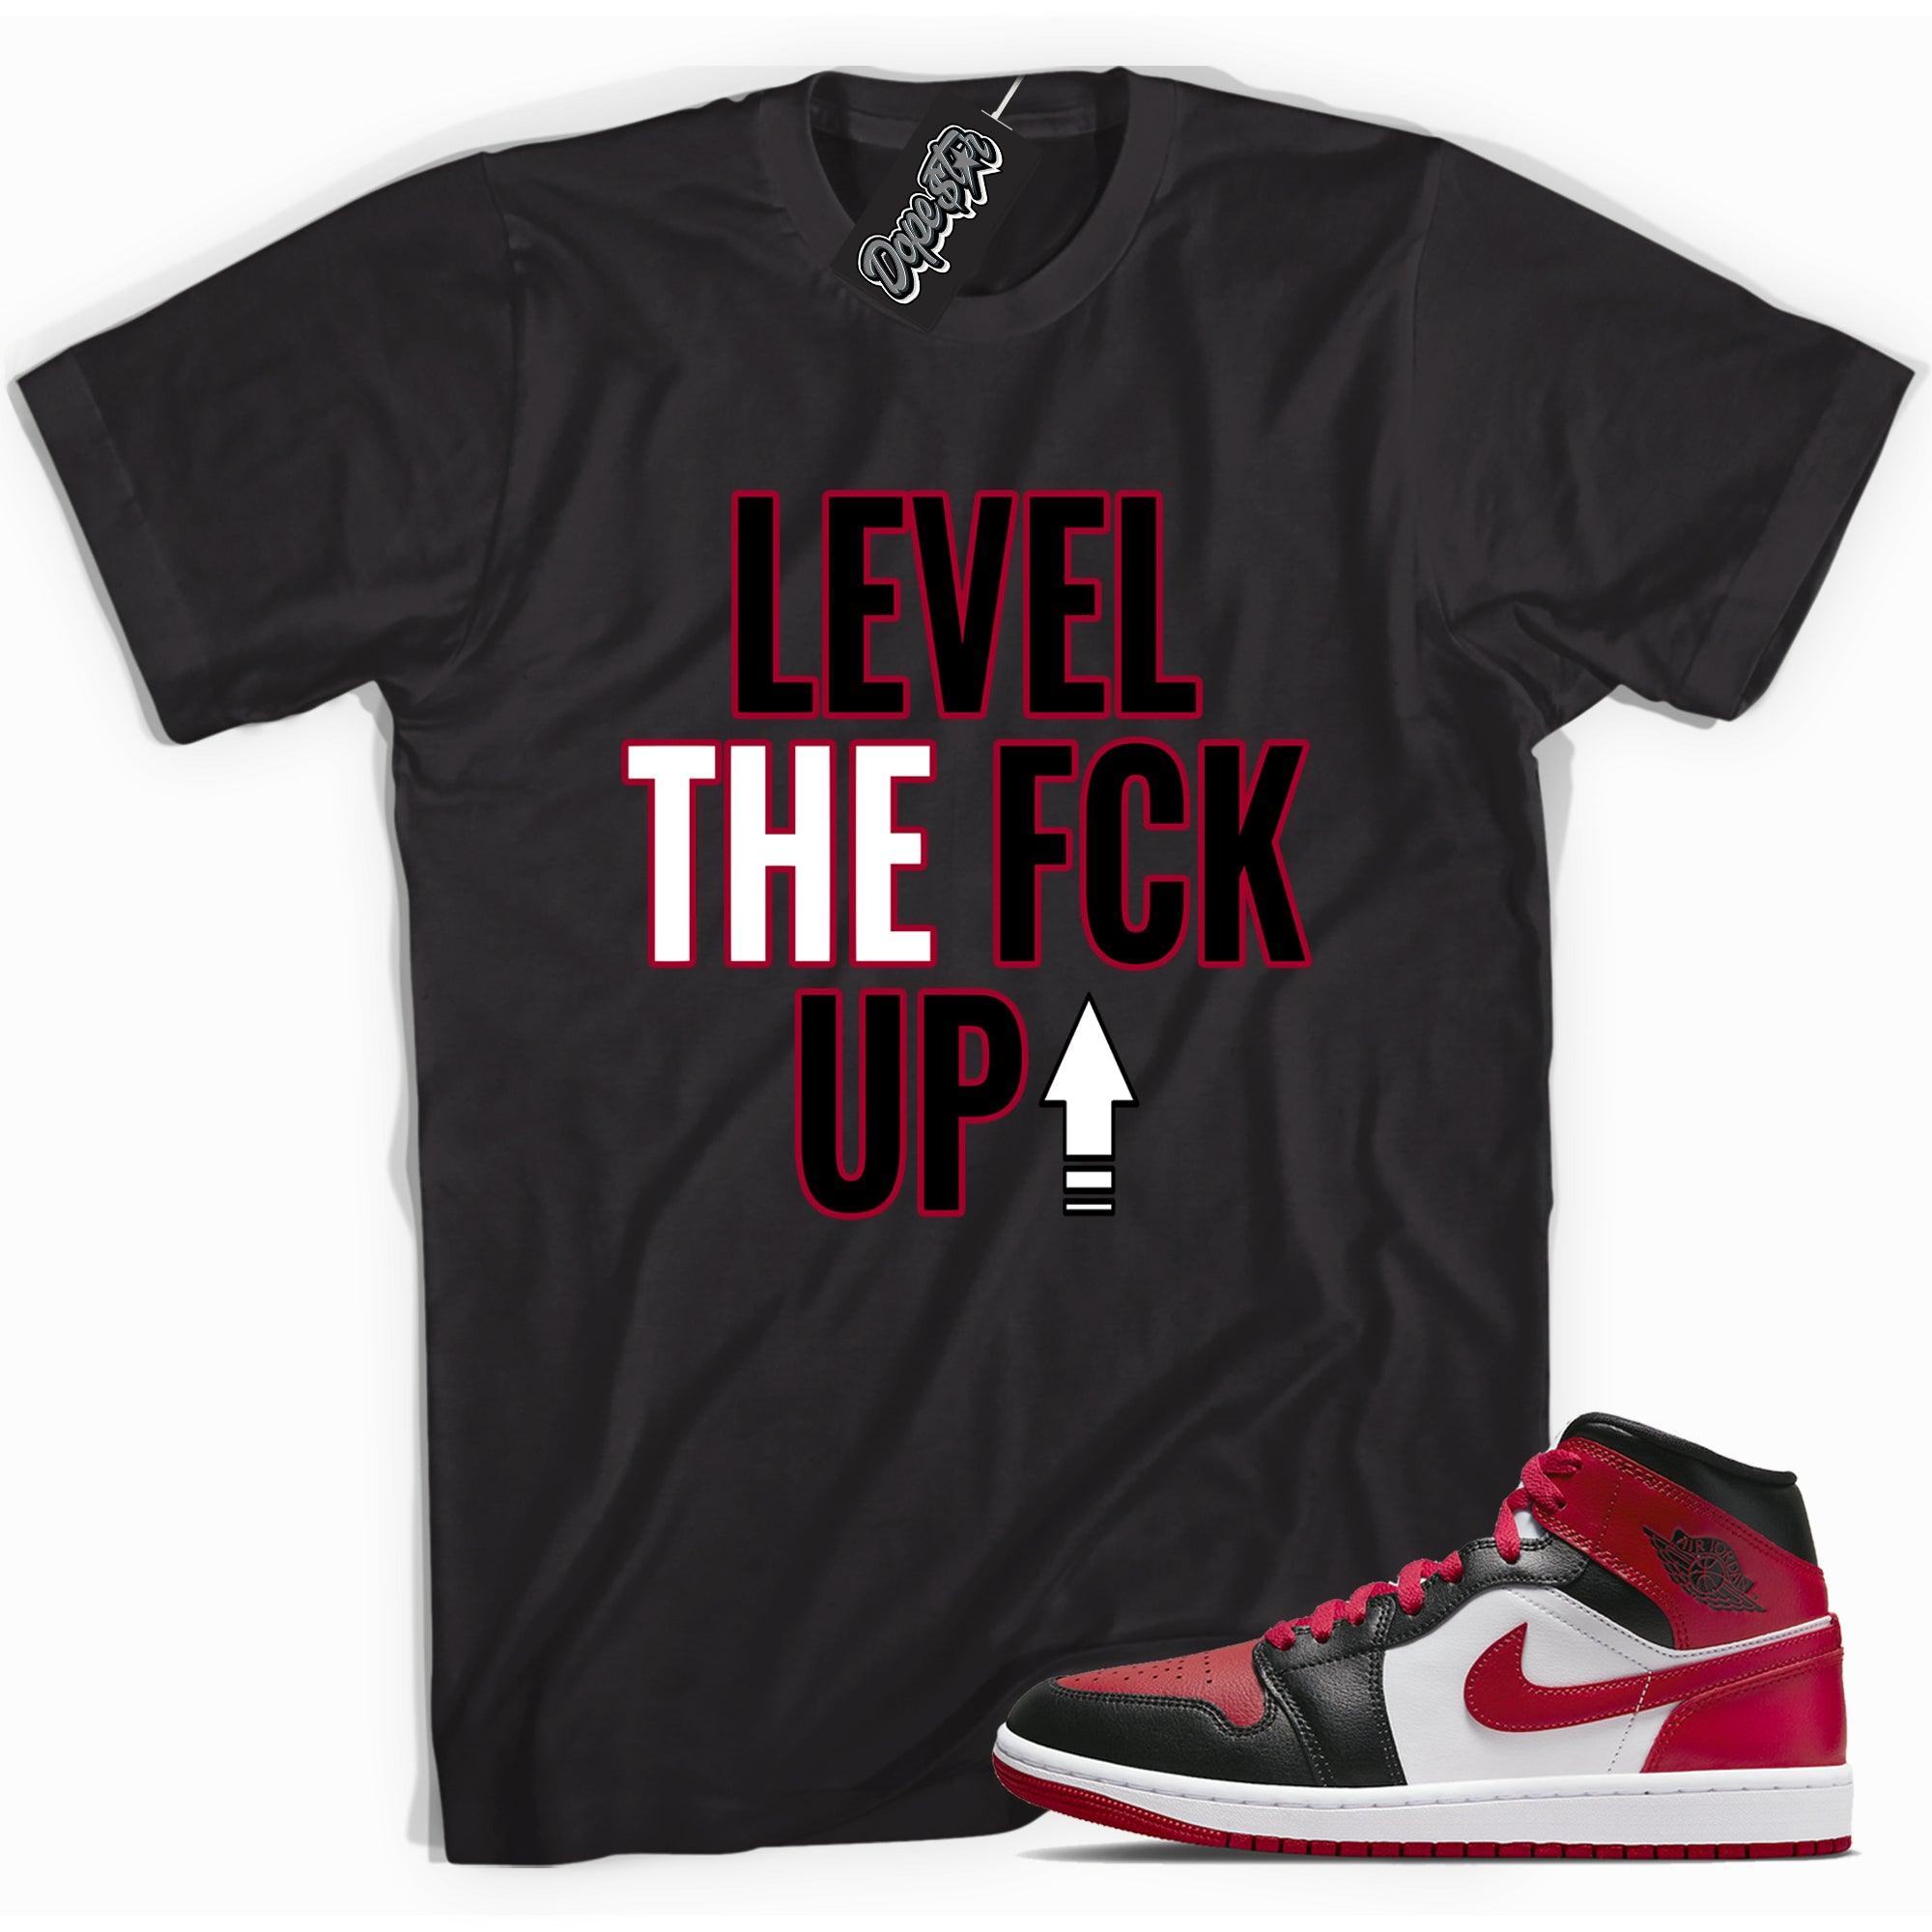 Cool black graphic tee with 'Level Up' print, that perfectly matches Air Jordan 1 Miid Alternate Bred Toe sneakers.